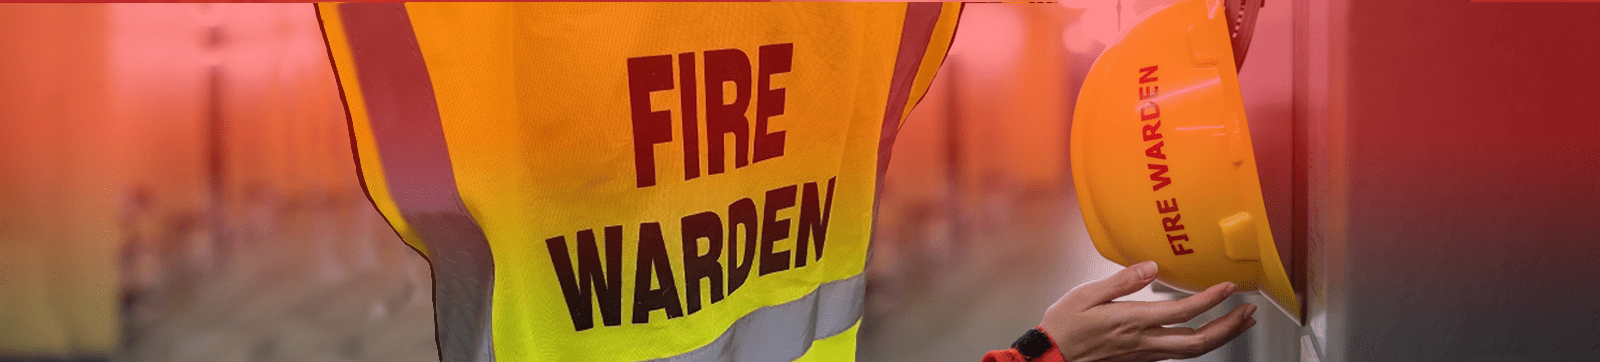 Fire Warden course image.